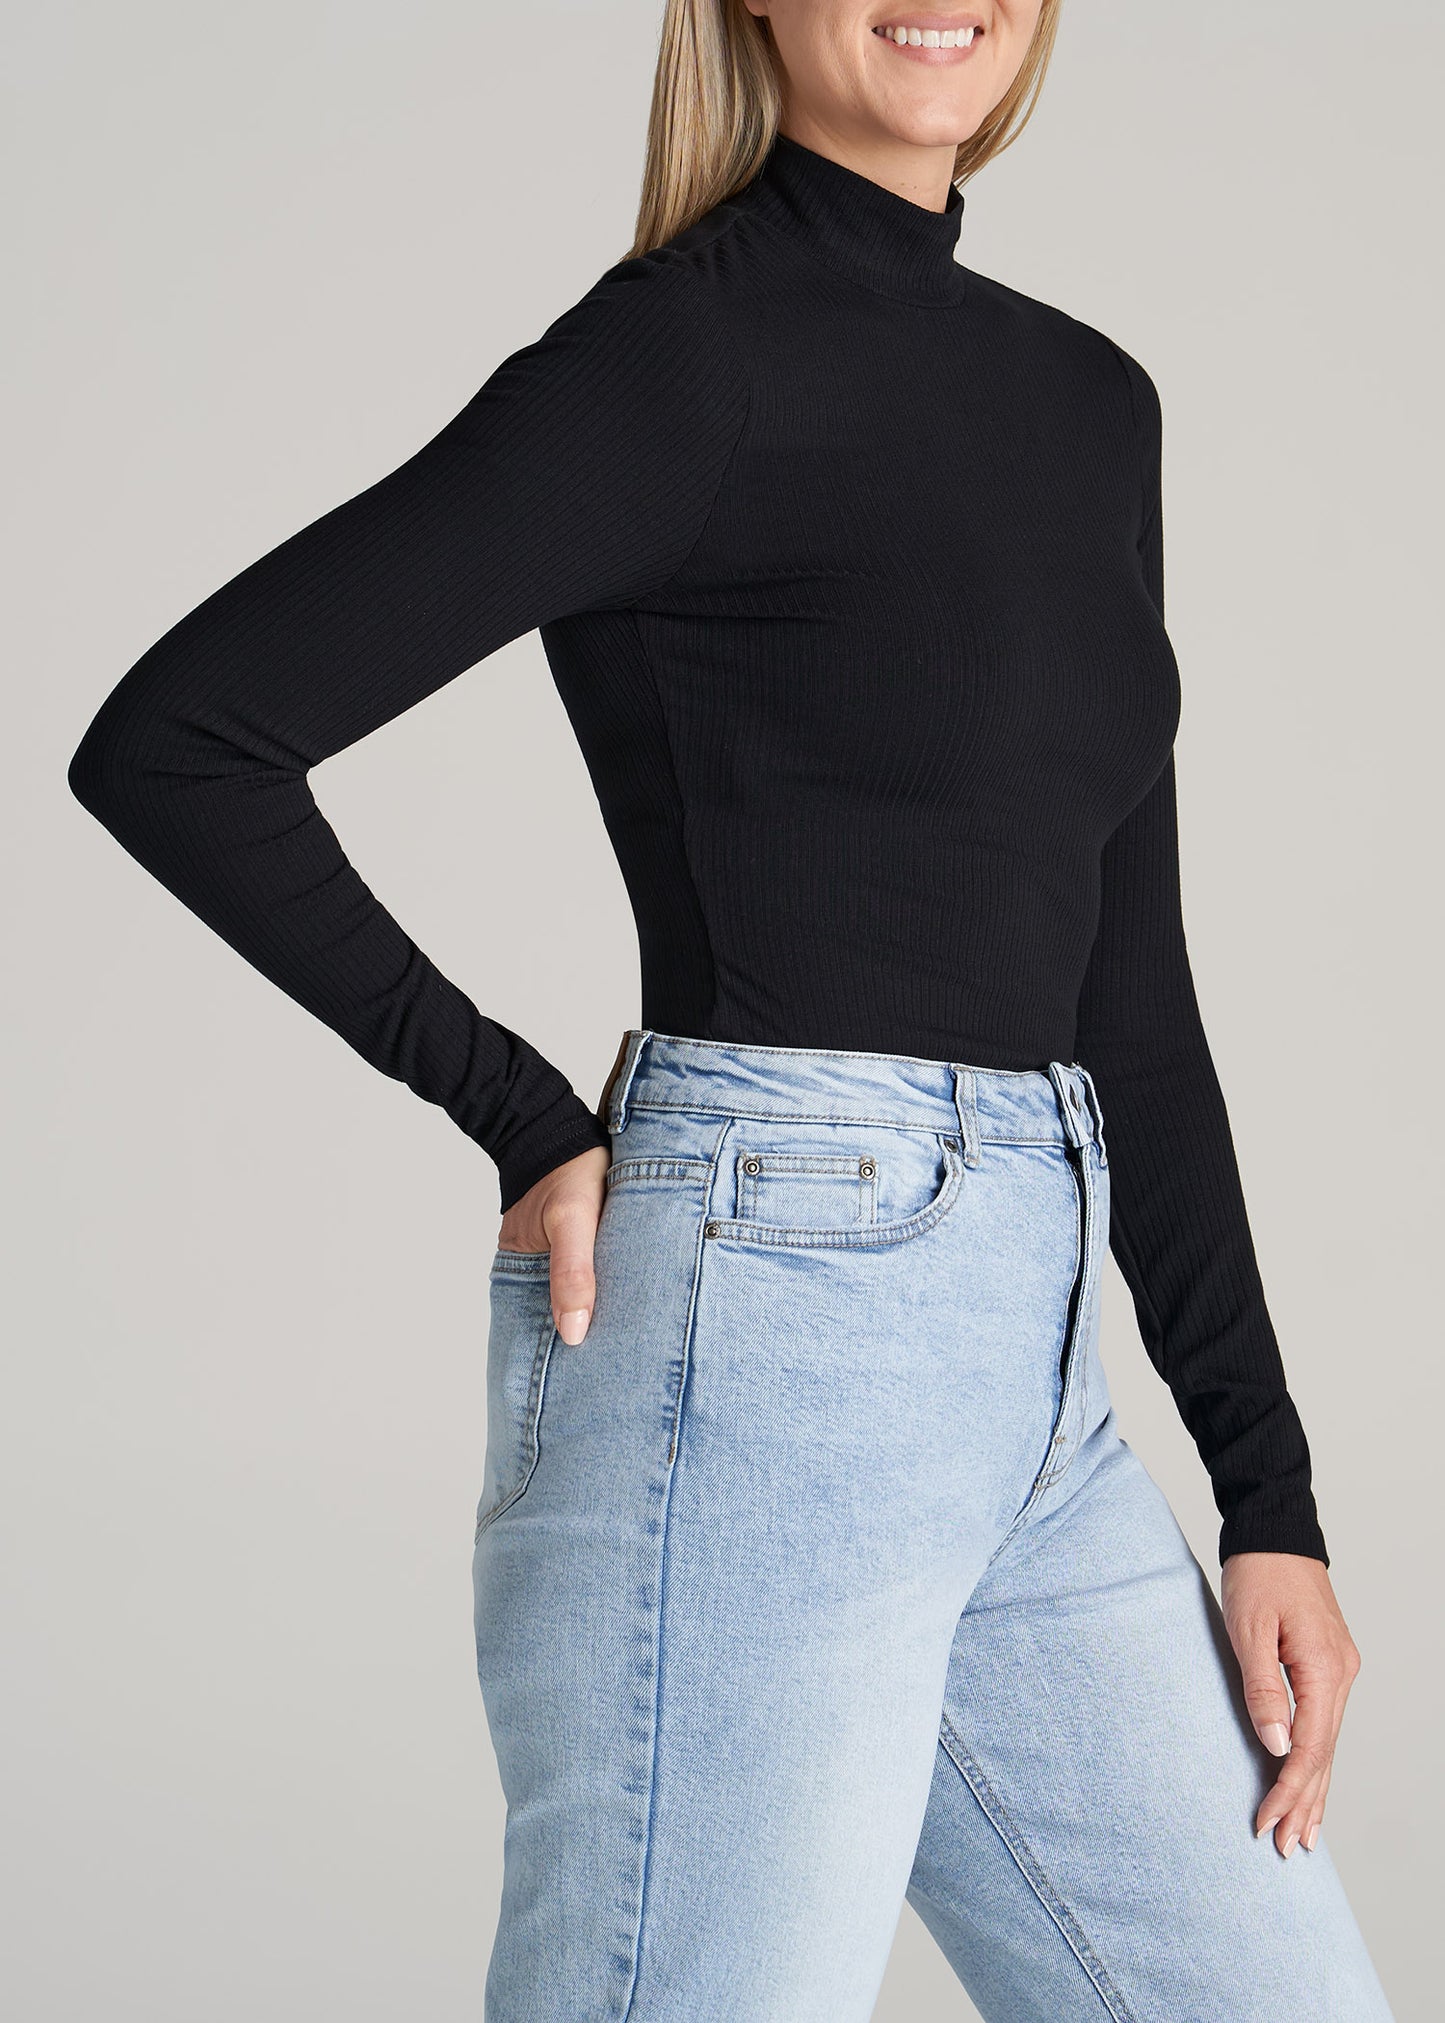         American-Tall-Women-LS-Mock-Neck-Ribbed-Top-Black-side